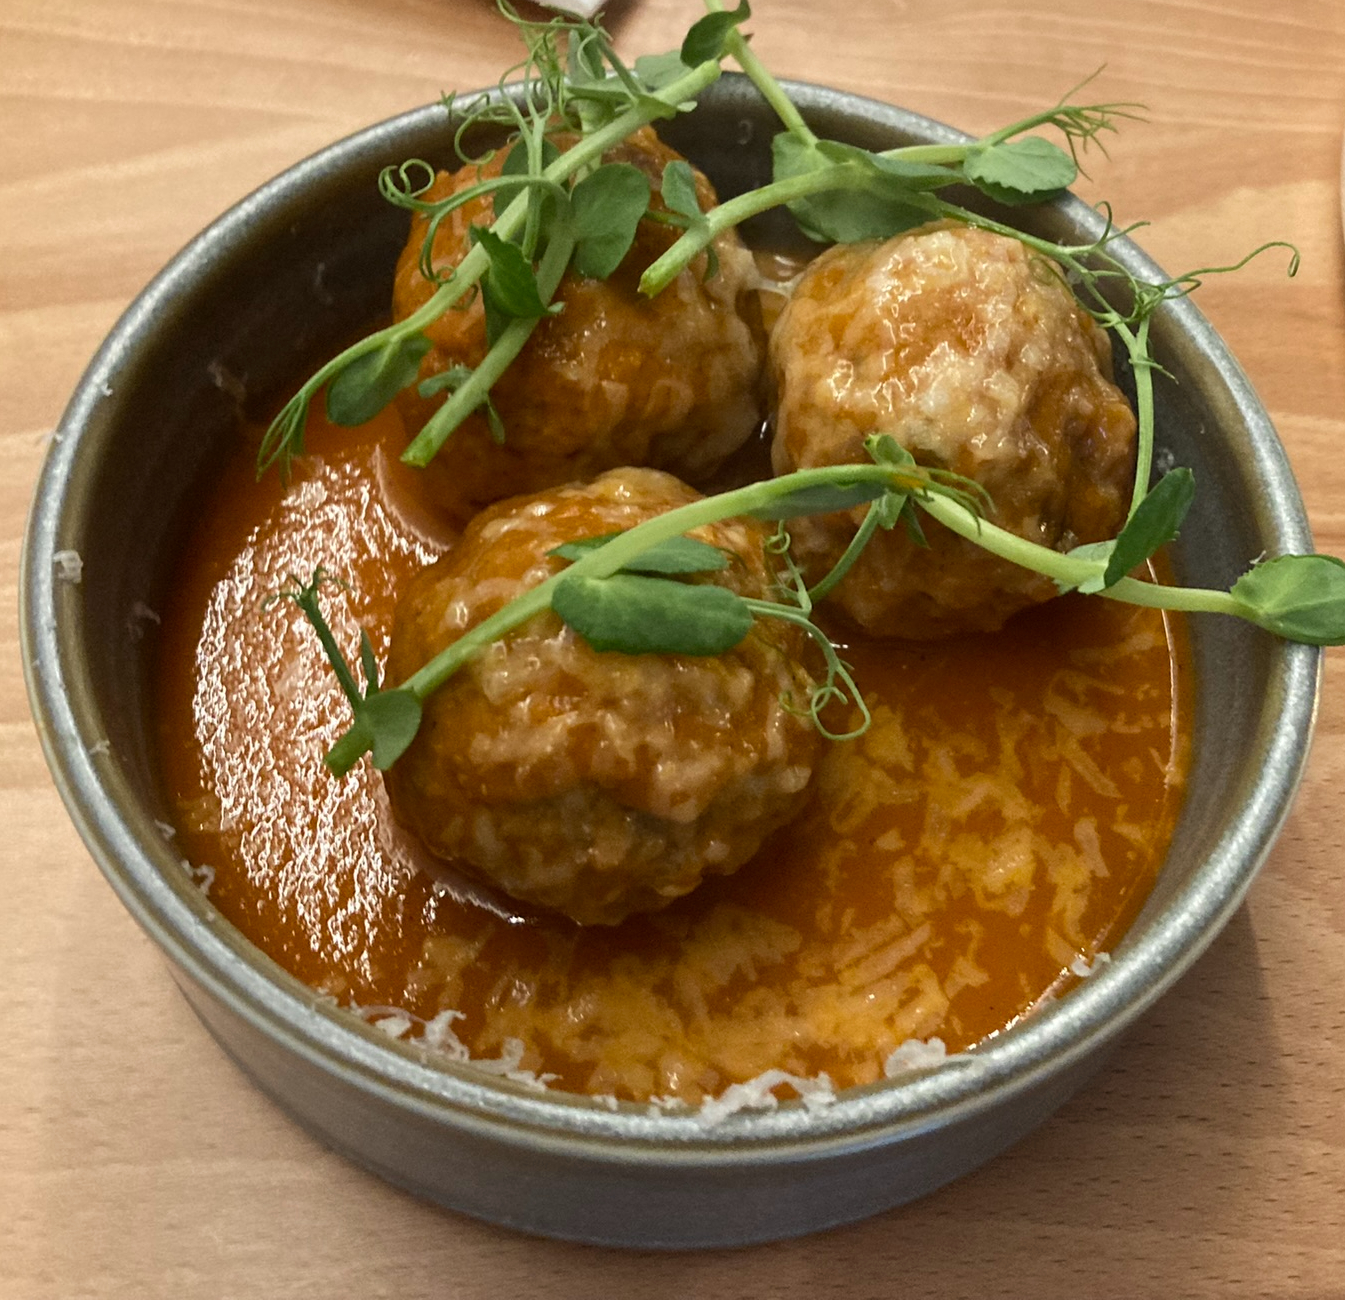 Albondigas, which translate from Spanish as meatballs